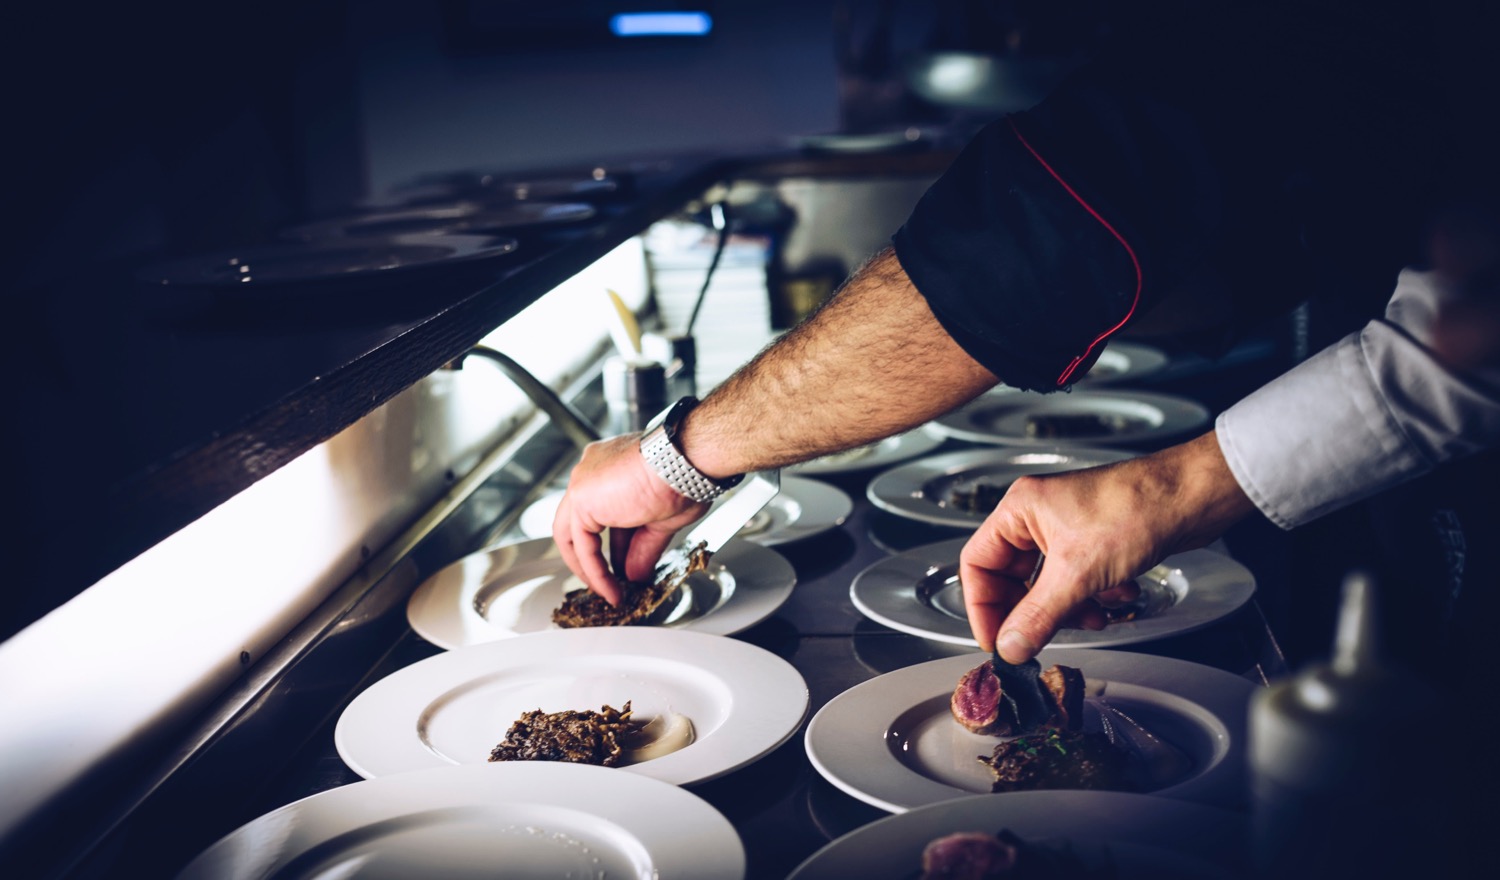 Restaurant Training and Employee Onboarding Processes You Should Use